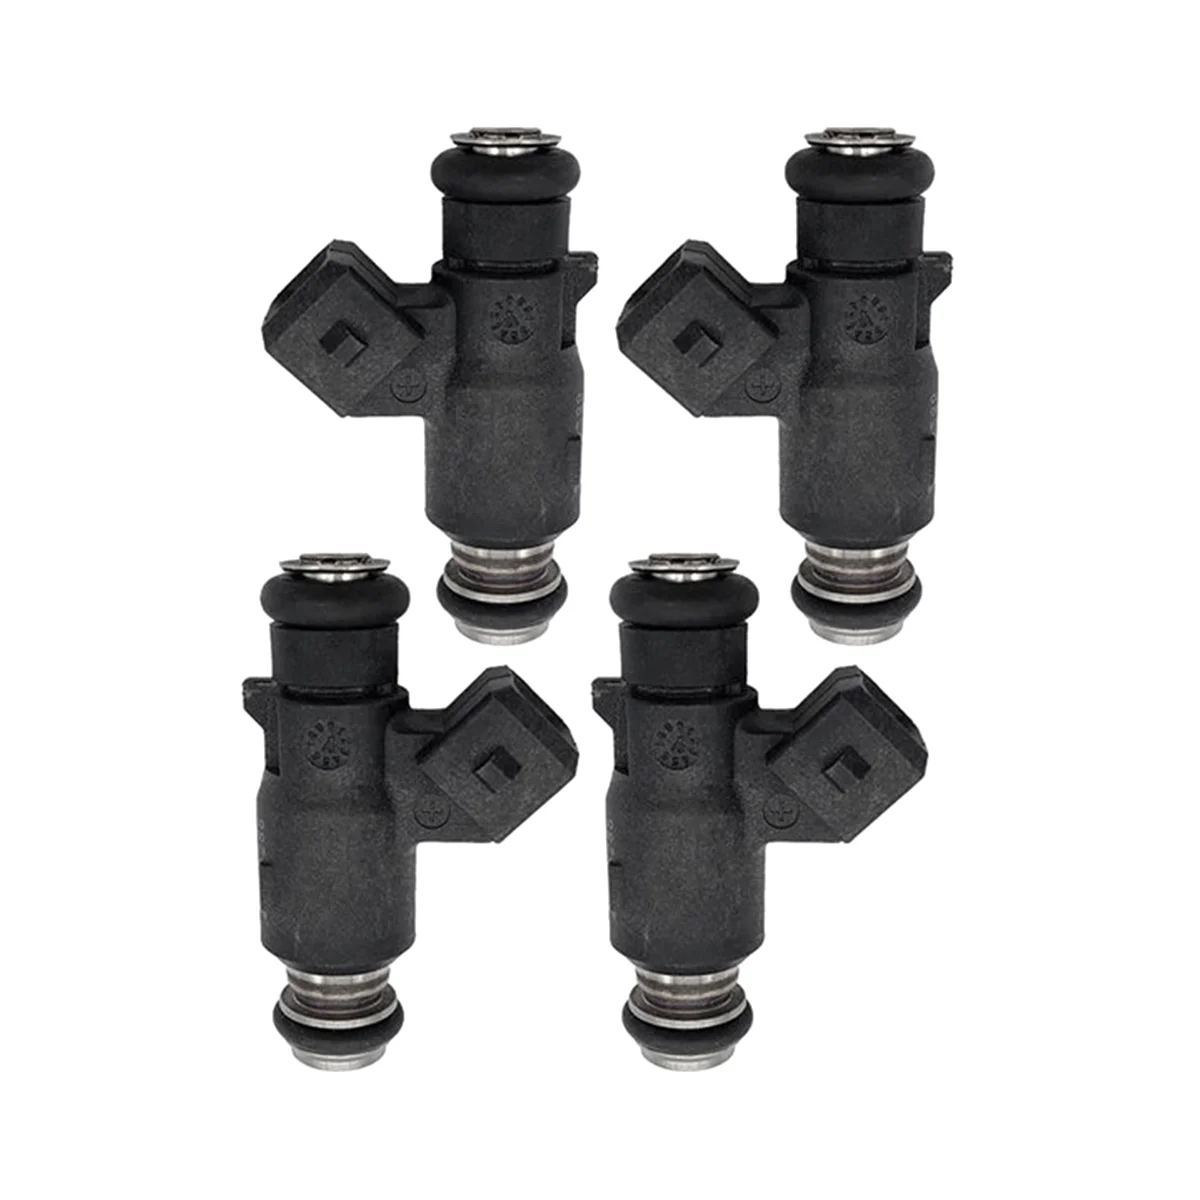 

4PCS Fuel Injector Nozzle 25335288 for Mercury Mariner 40HP-60HP Outboard 2-Stroke 2002-2006